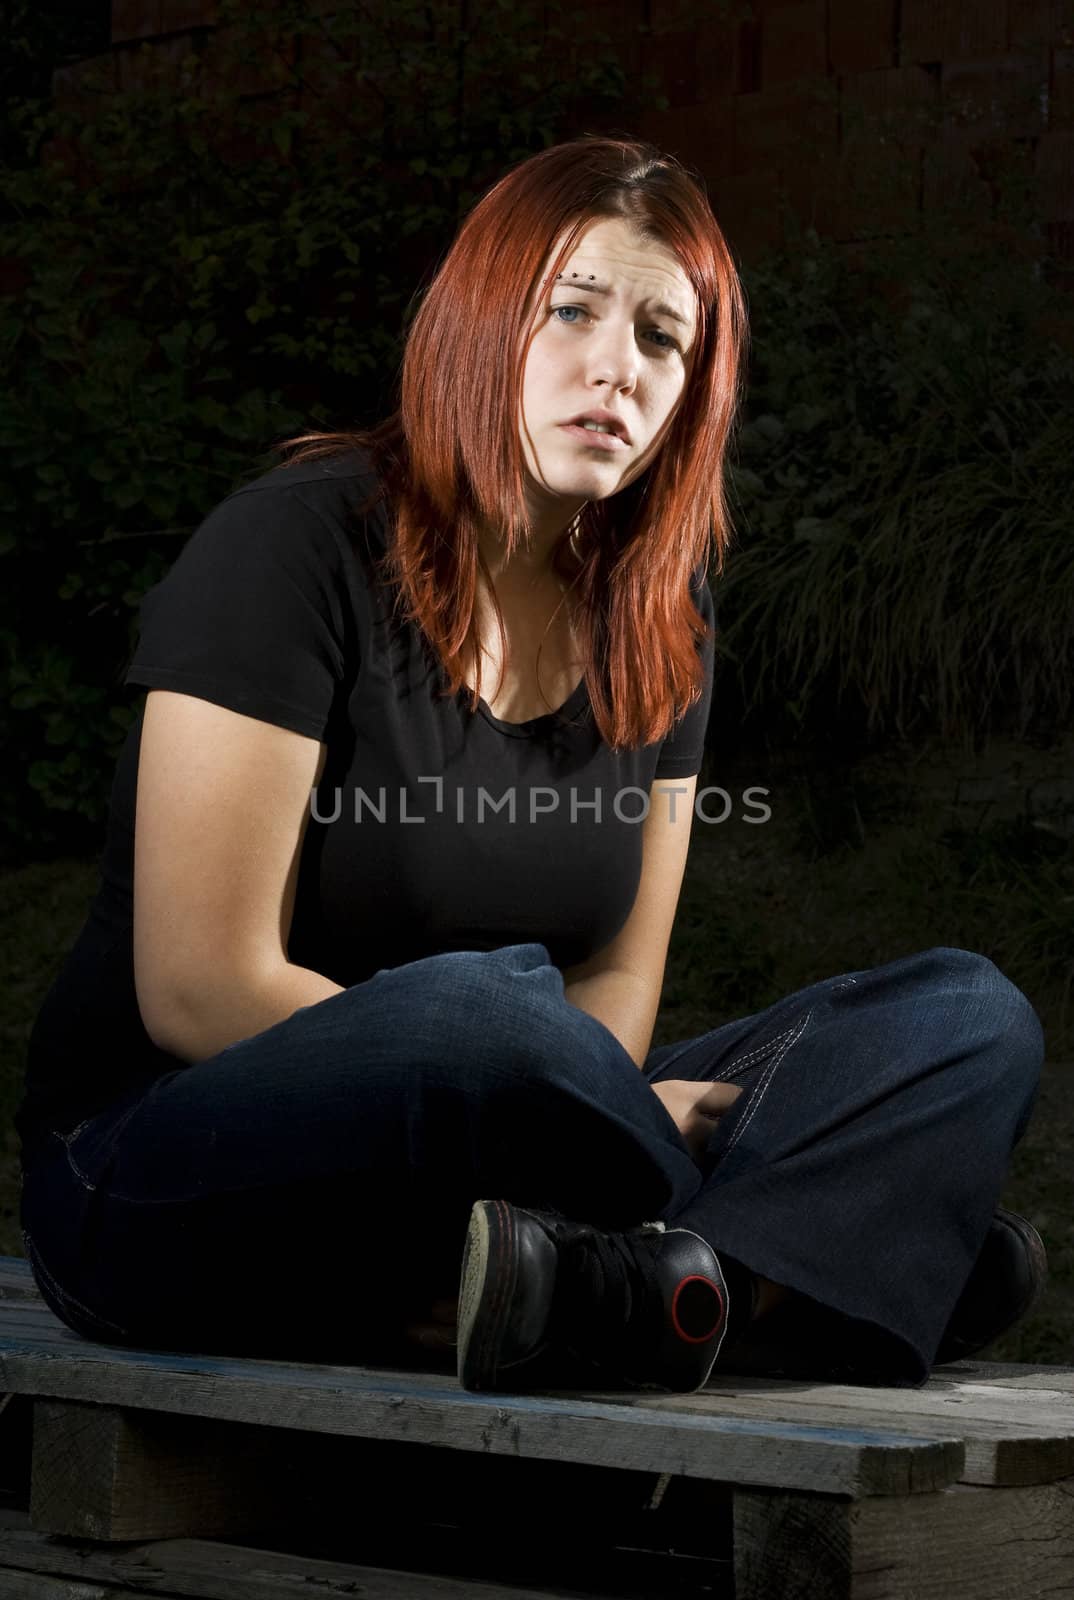 Girl siting on wood, flash lighting, redhead.

Lit with two offcamera flashes.